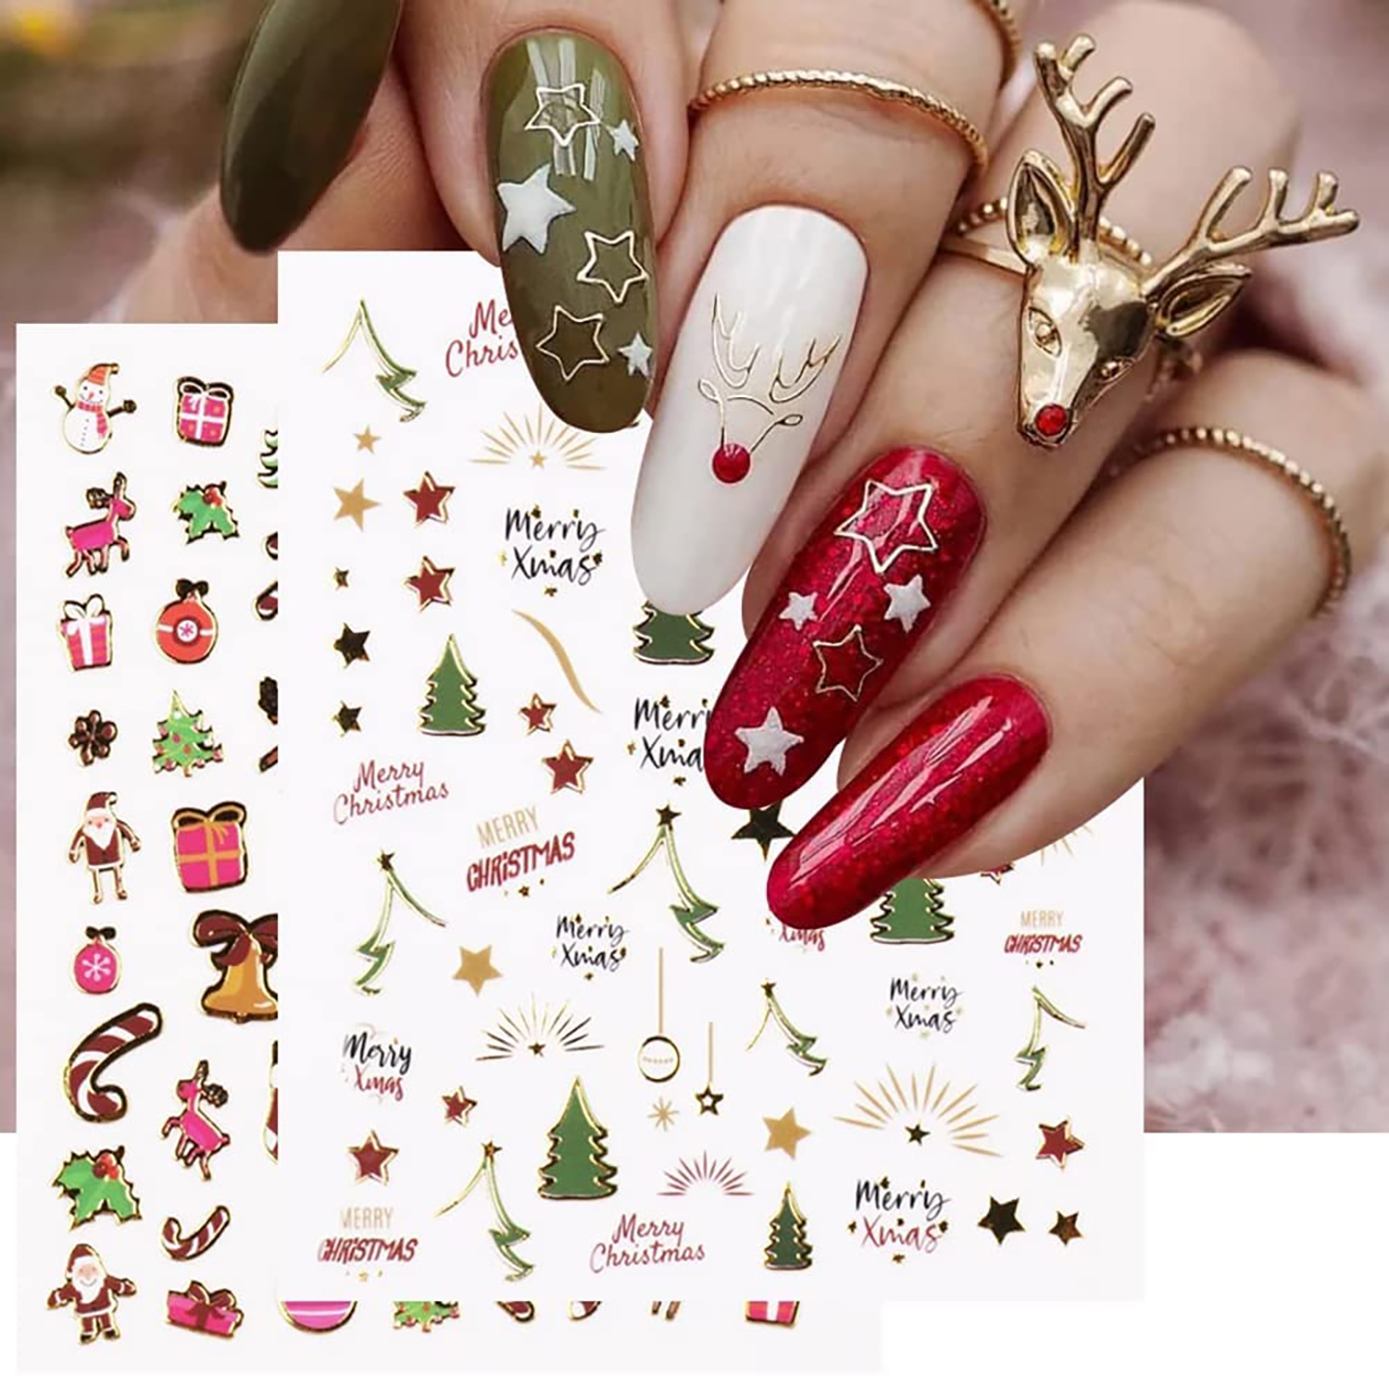 Cute & Adorable Nail Art 3D Stickers ? With Rhinestones Hearts / Flowers  Collection of 10 Decals /EEX-I/ : Amazon.in: Beauty